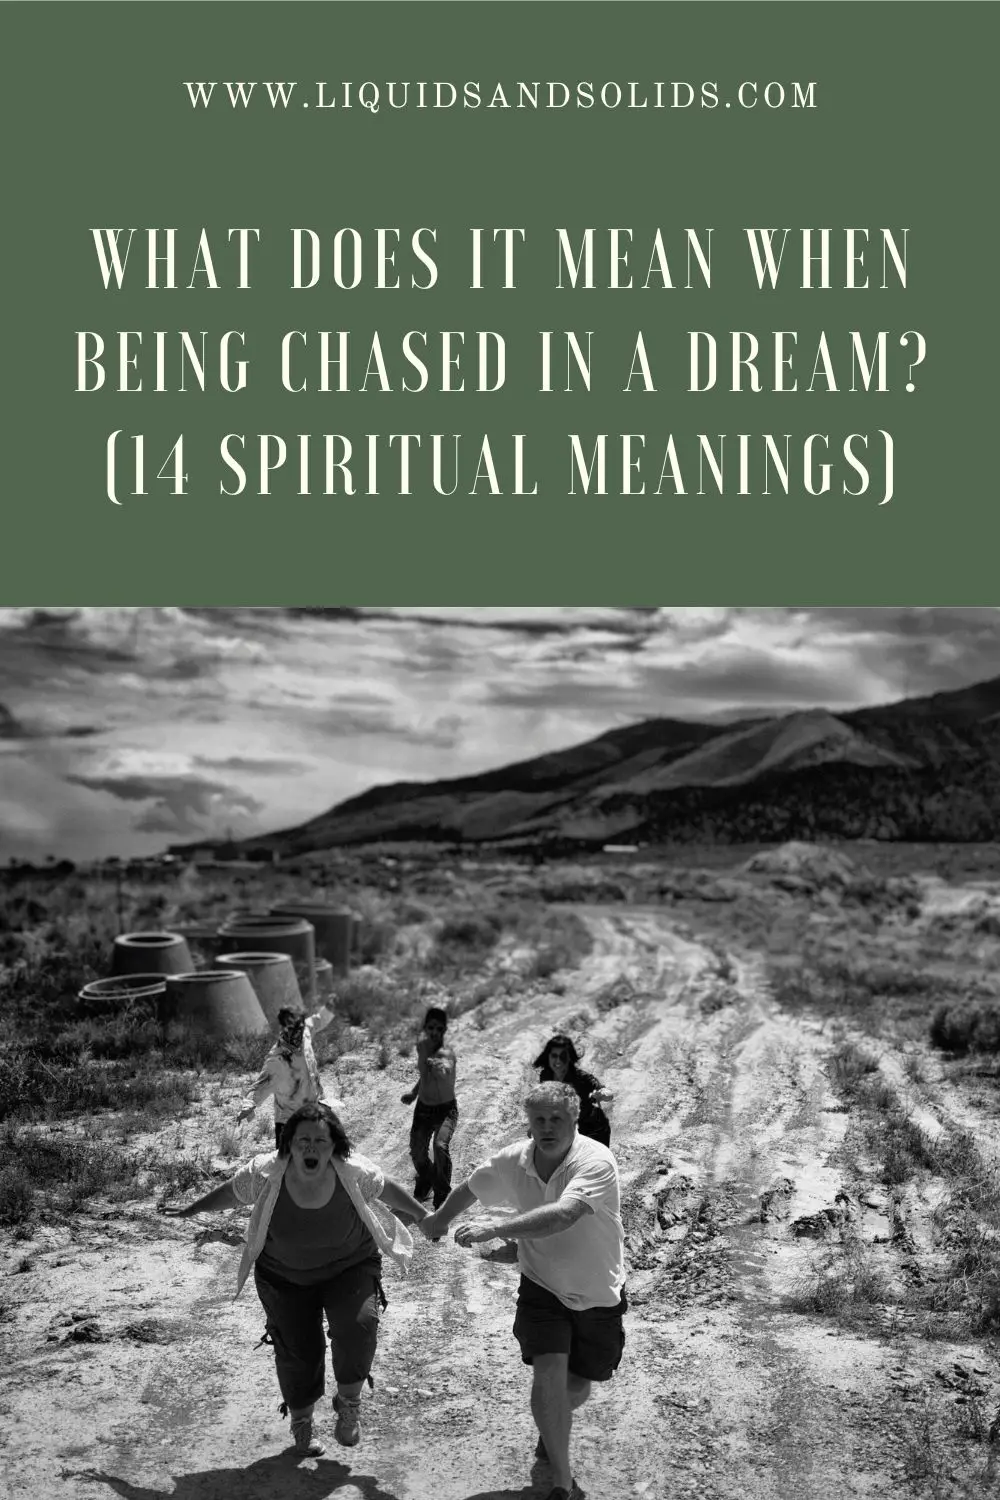 What Does Getting Chased In A Dream Mean?